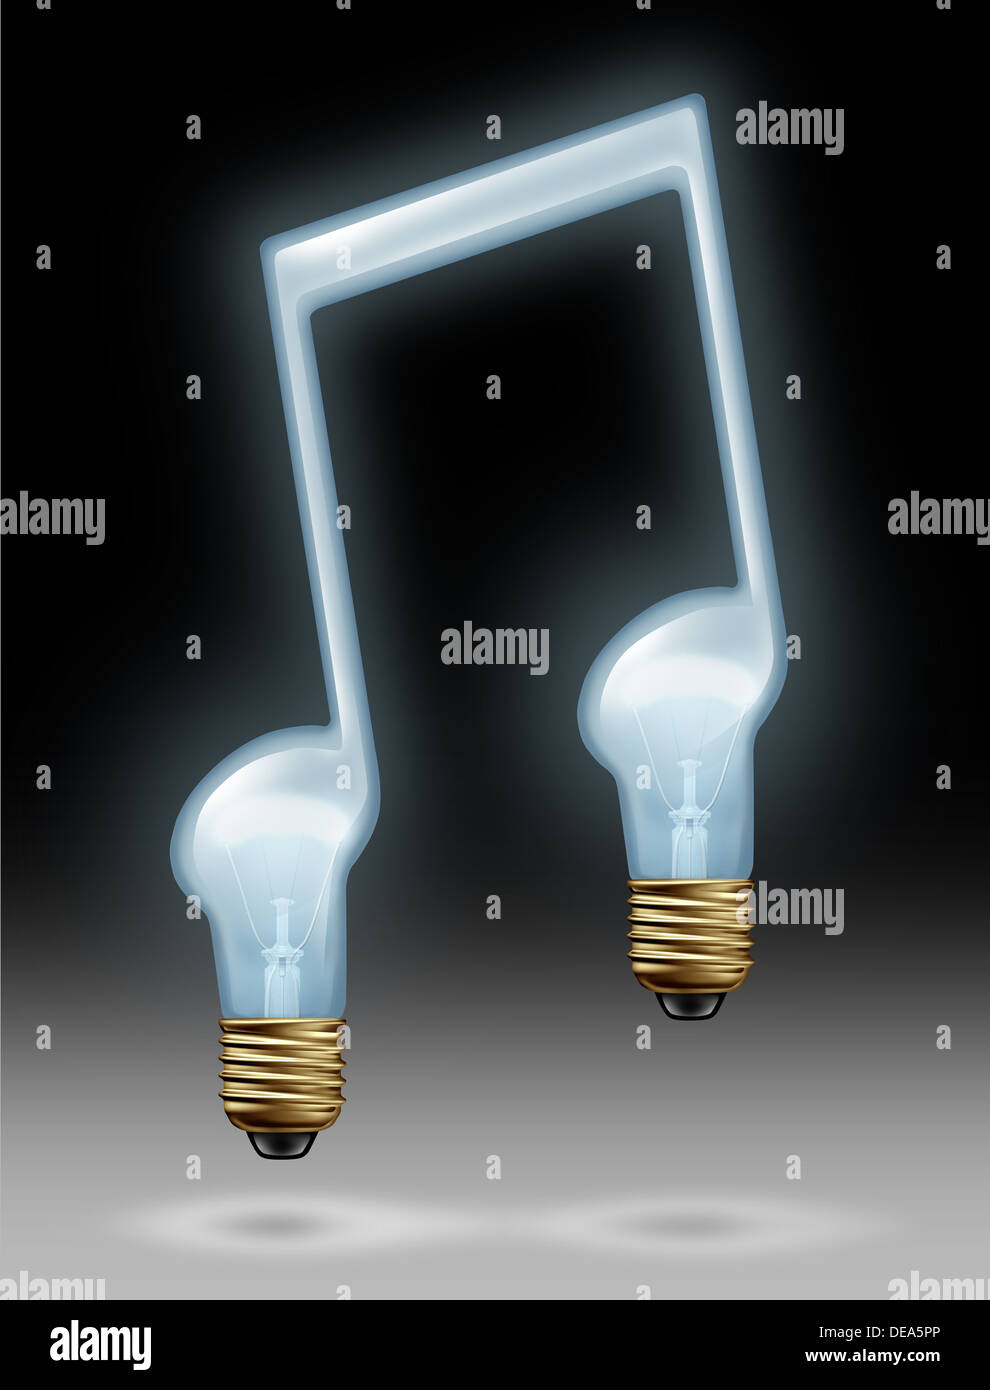 Musical inspiration creativity concept with a musical note symbol in the shape of a glowing glass light bulb as an icon of imagination and creative sound as intelligent music media ideas on a black background. Stock Photo